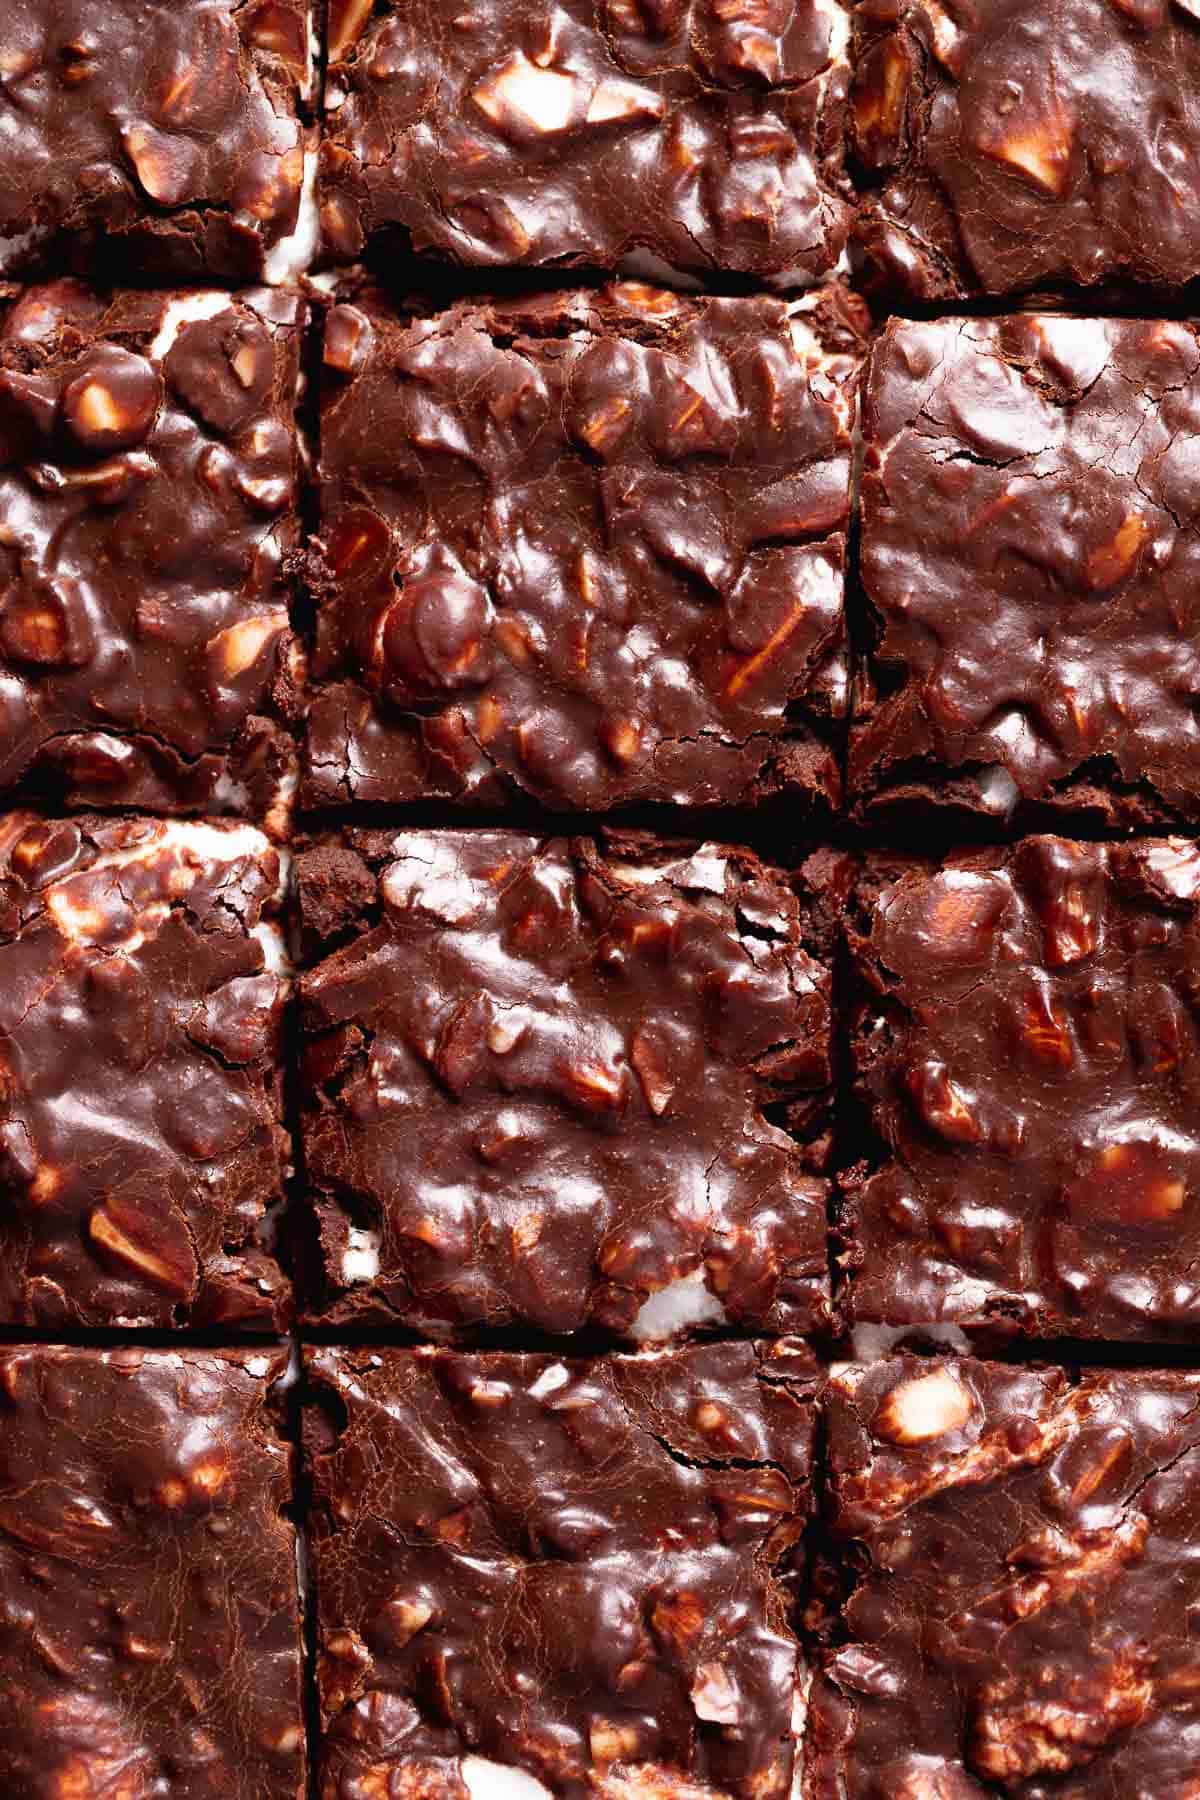 Rocky road brownies cut into squares.